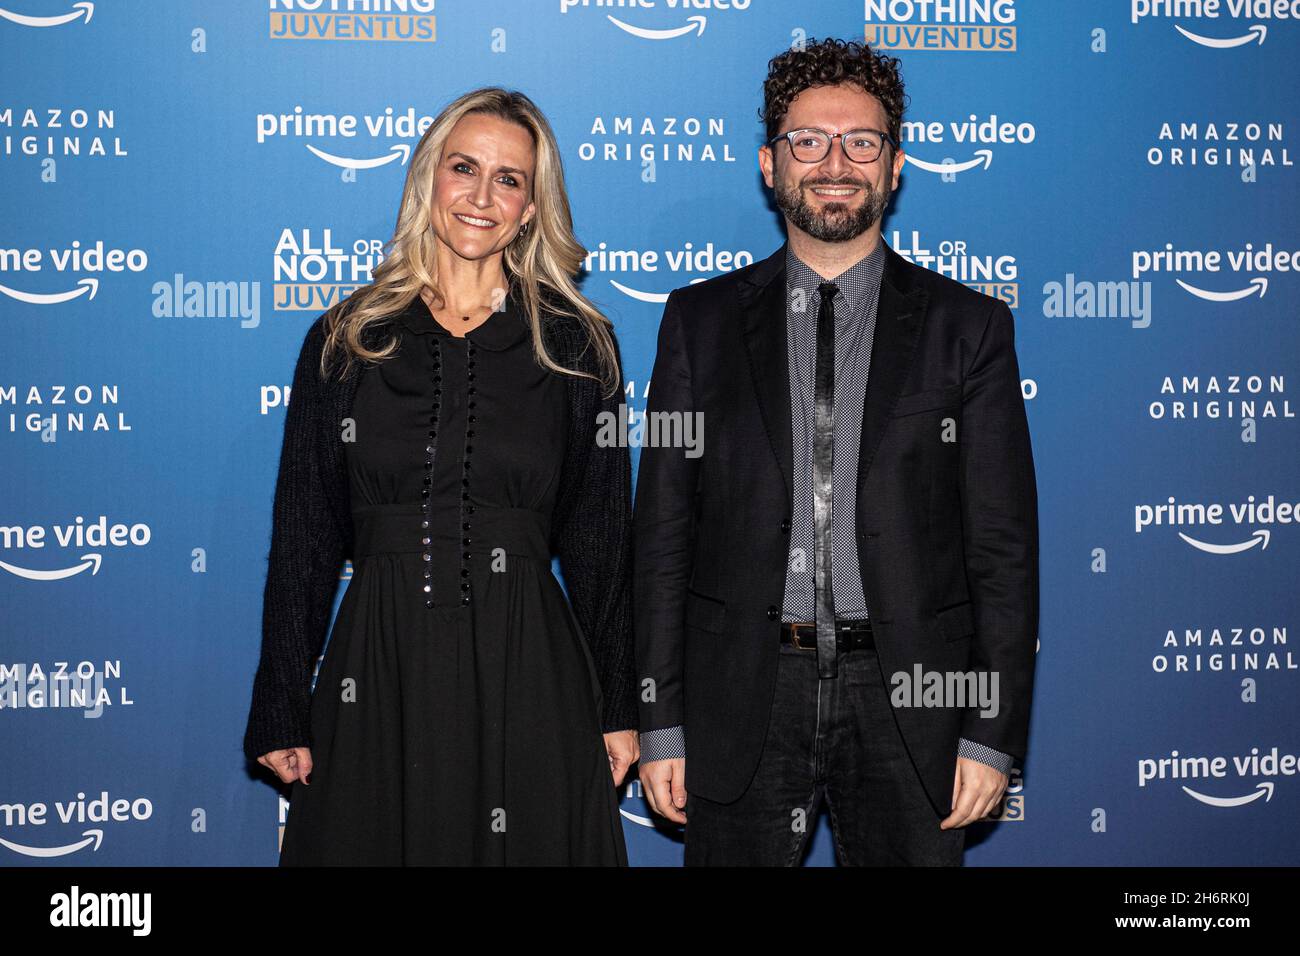 Turin, Italy. 17 November 2021. Nicole Morganti  and Dante Sollazzo pose during the photo call of the new Amazon Prime Video show 'All or Nothing: Juventus' premiere. Credit: Nicolò Campo/Alamy Live News Stock Photo